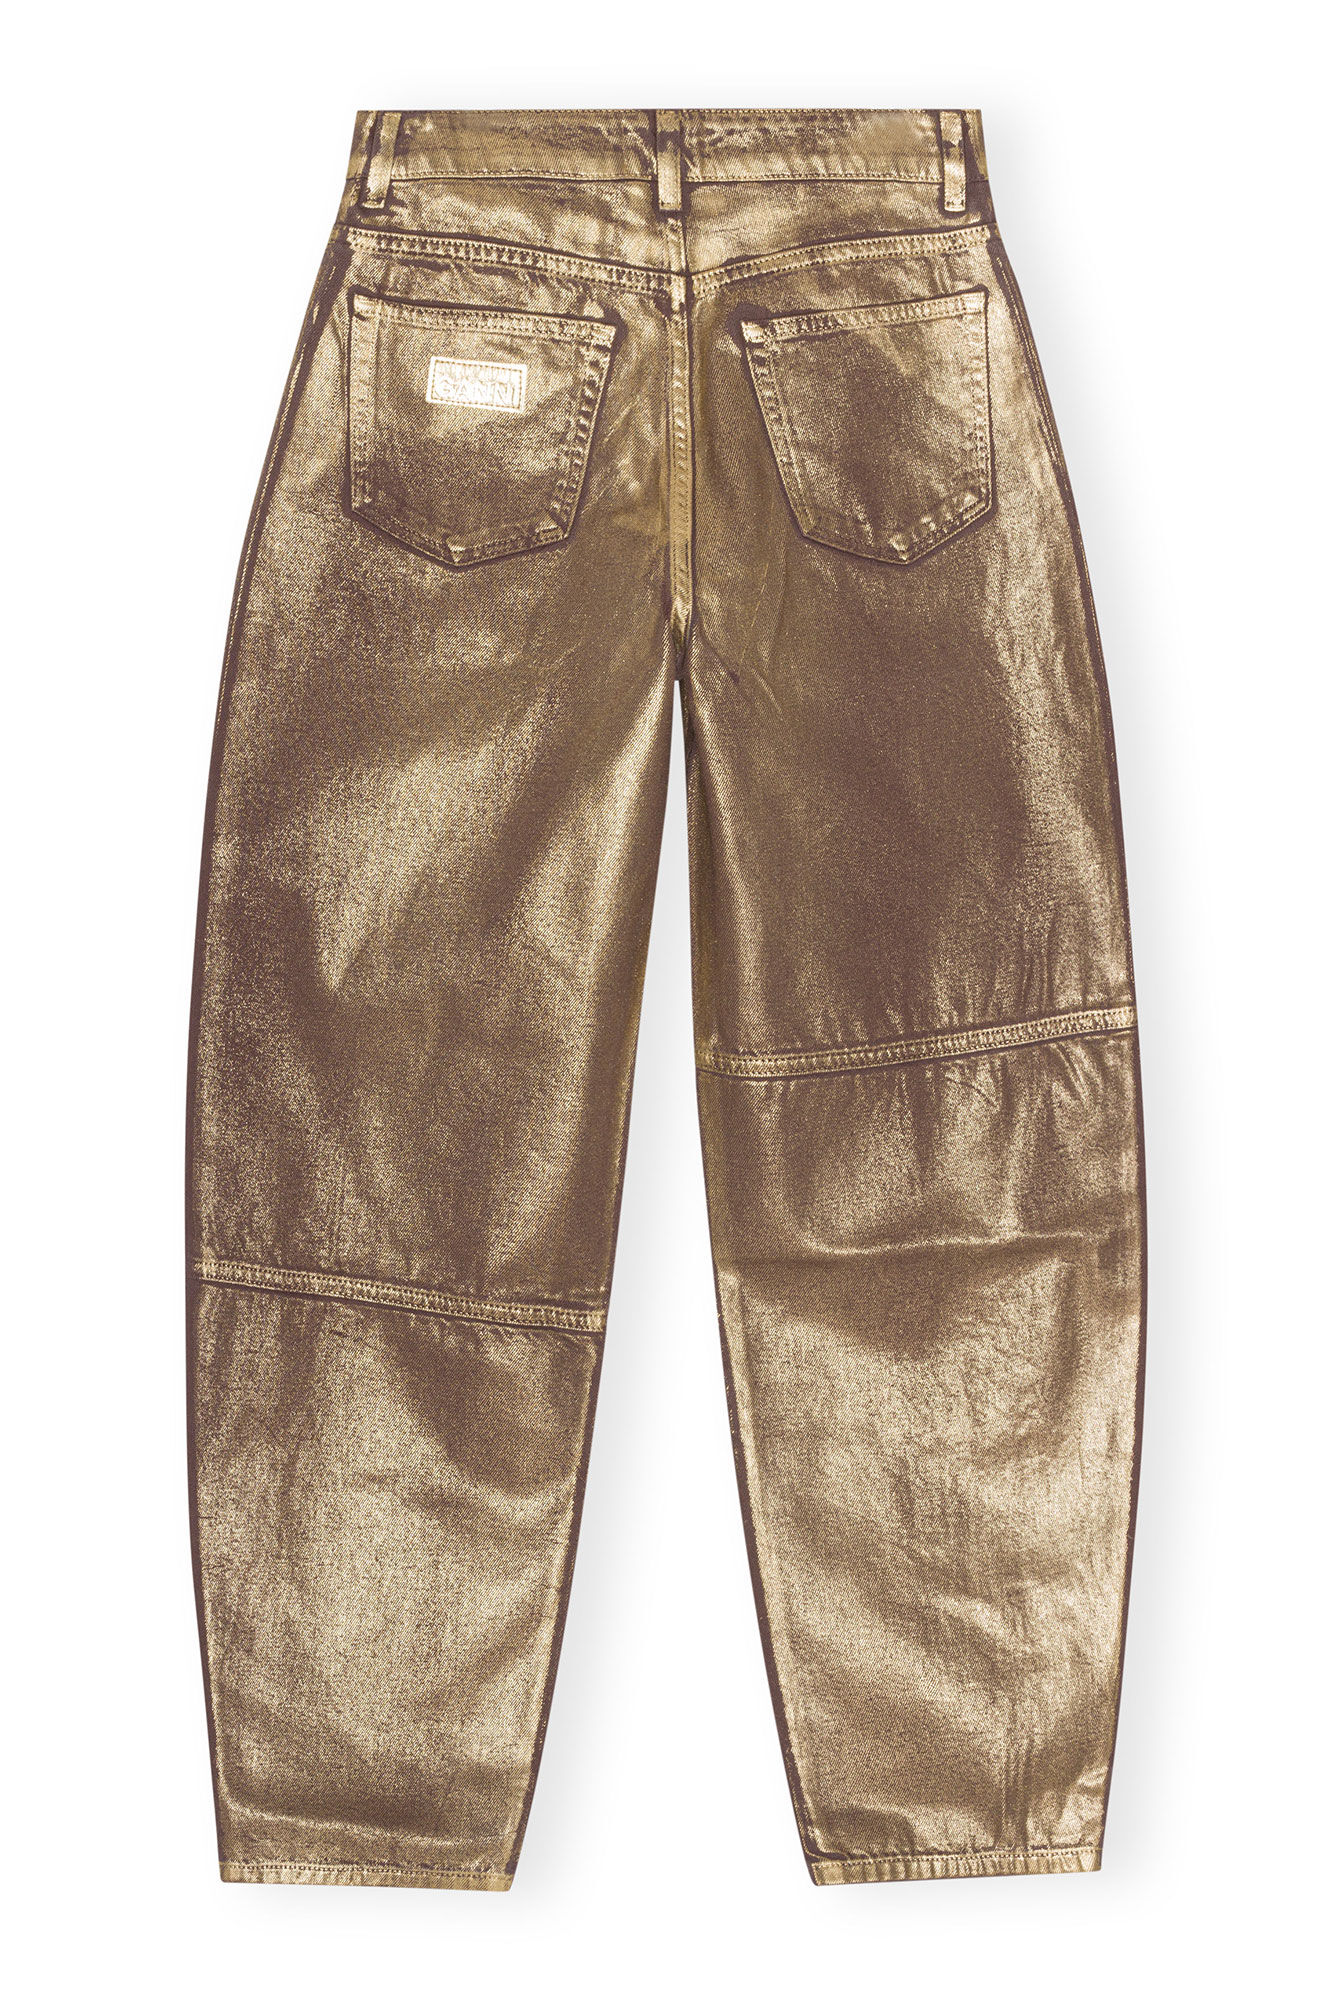 Casual Comfy Pants- Plain Gold Rush – The Silver Strawberry